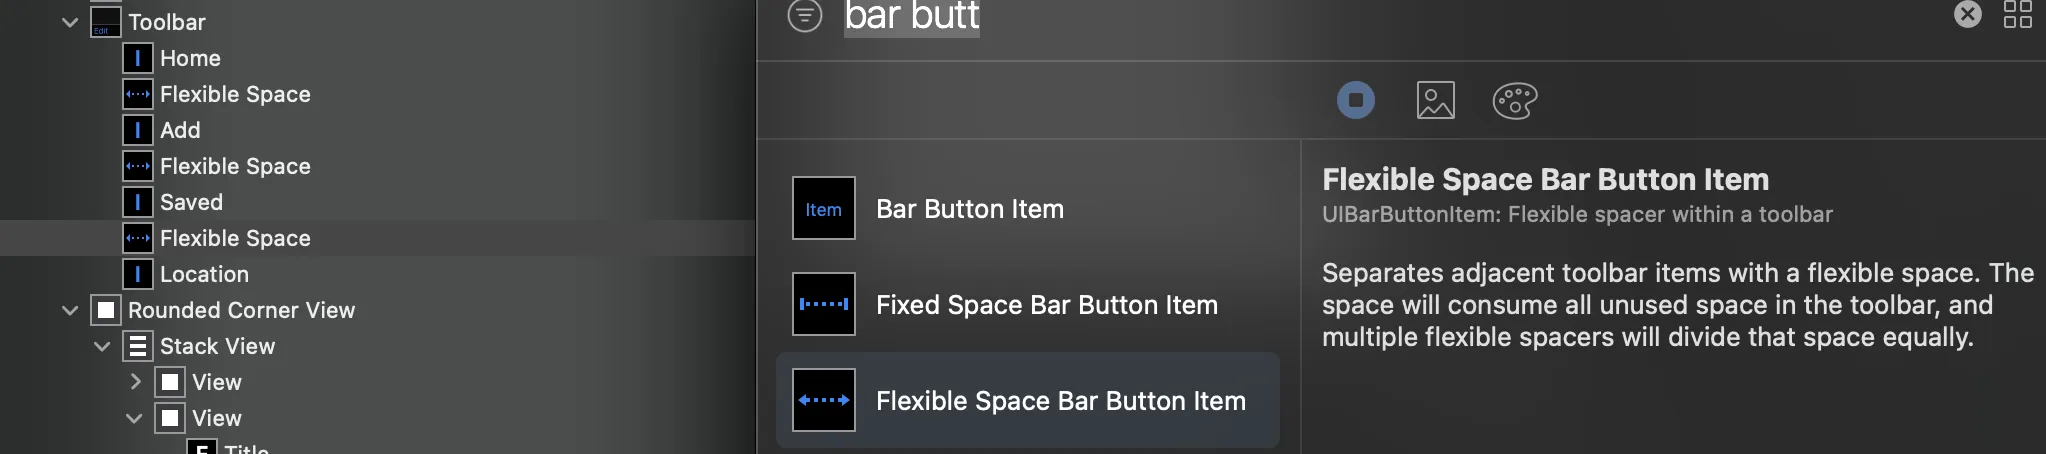 Storyboard Flexible Space Bar Button Item